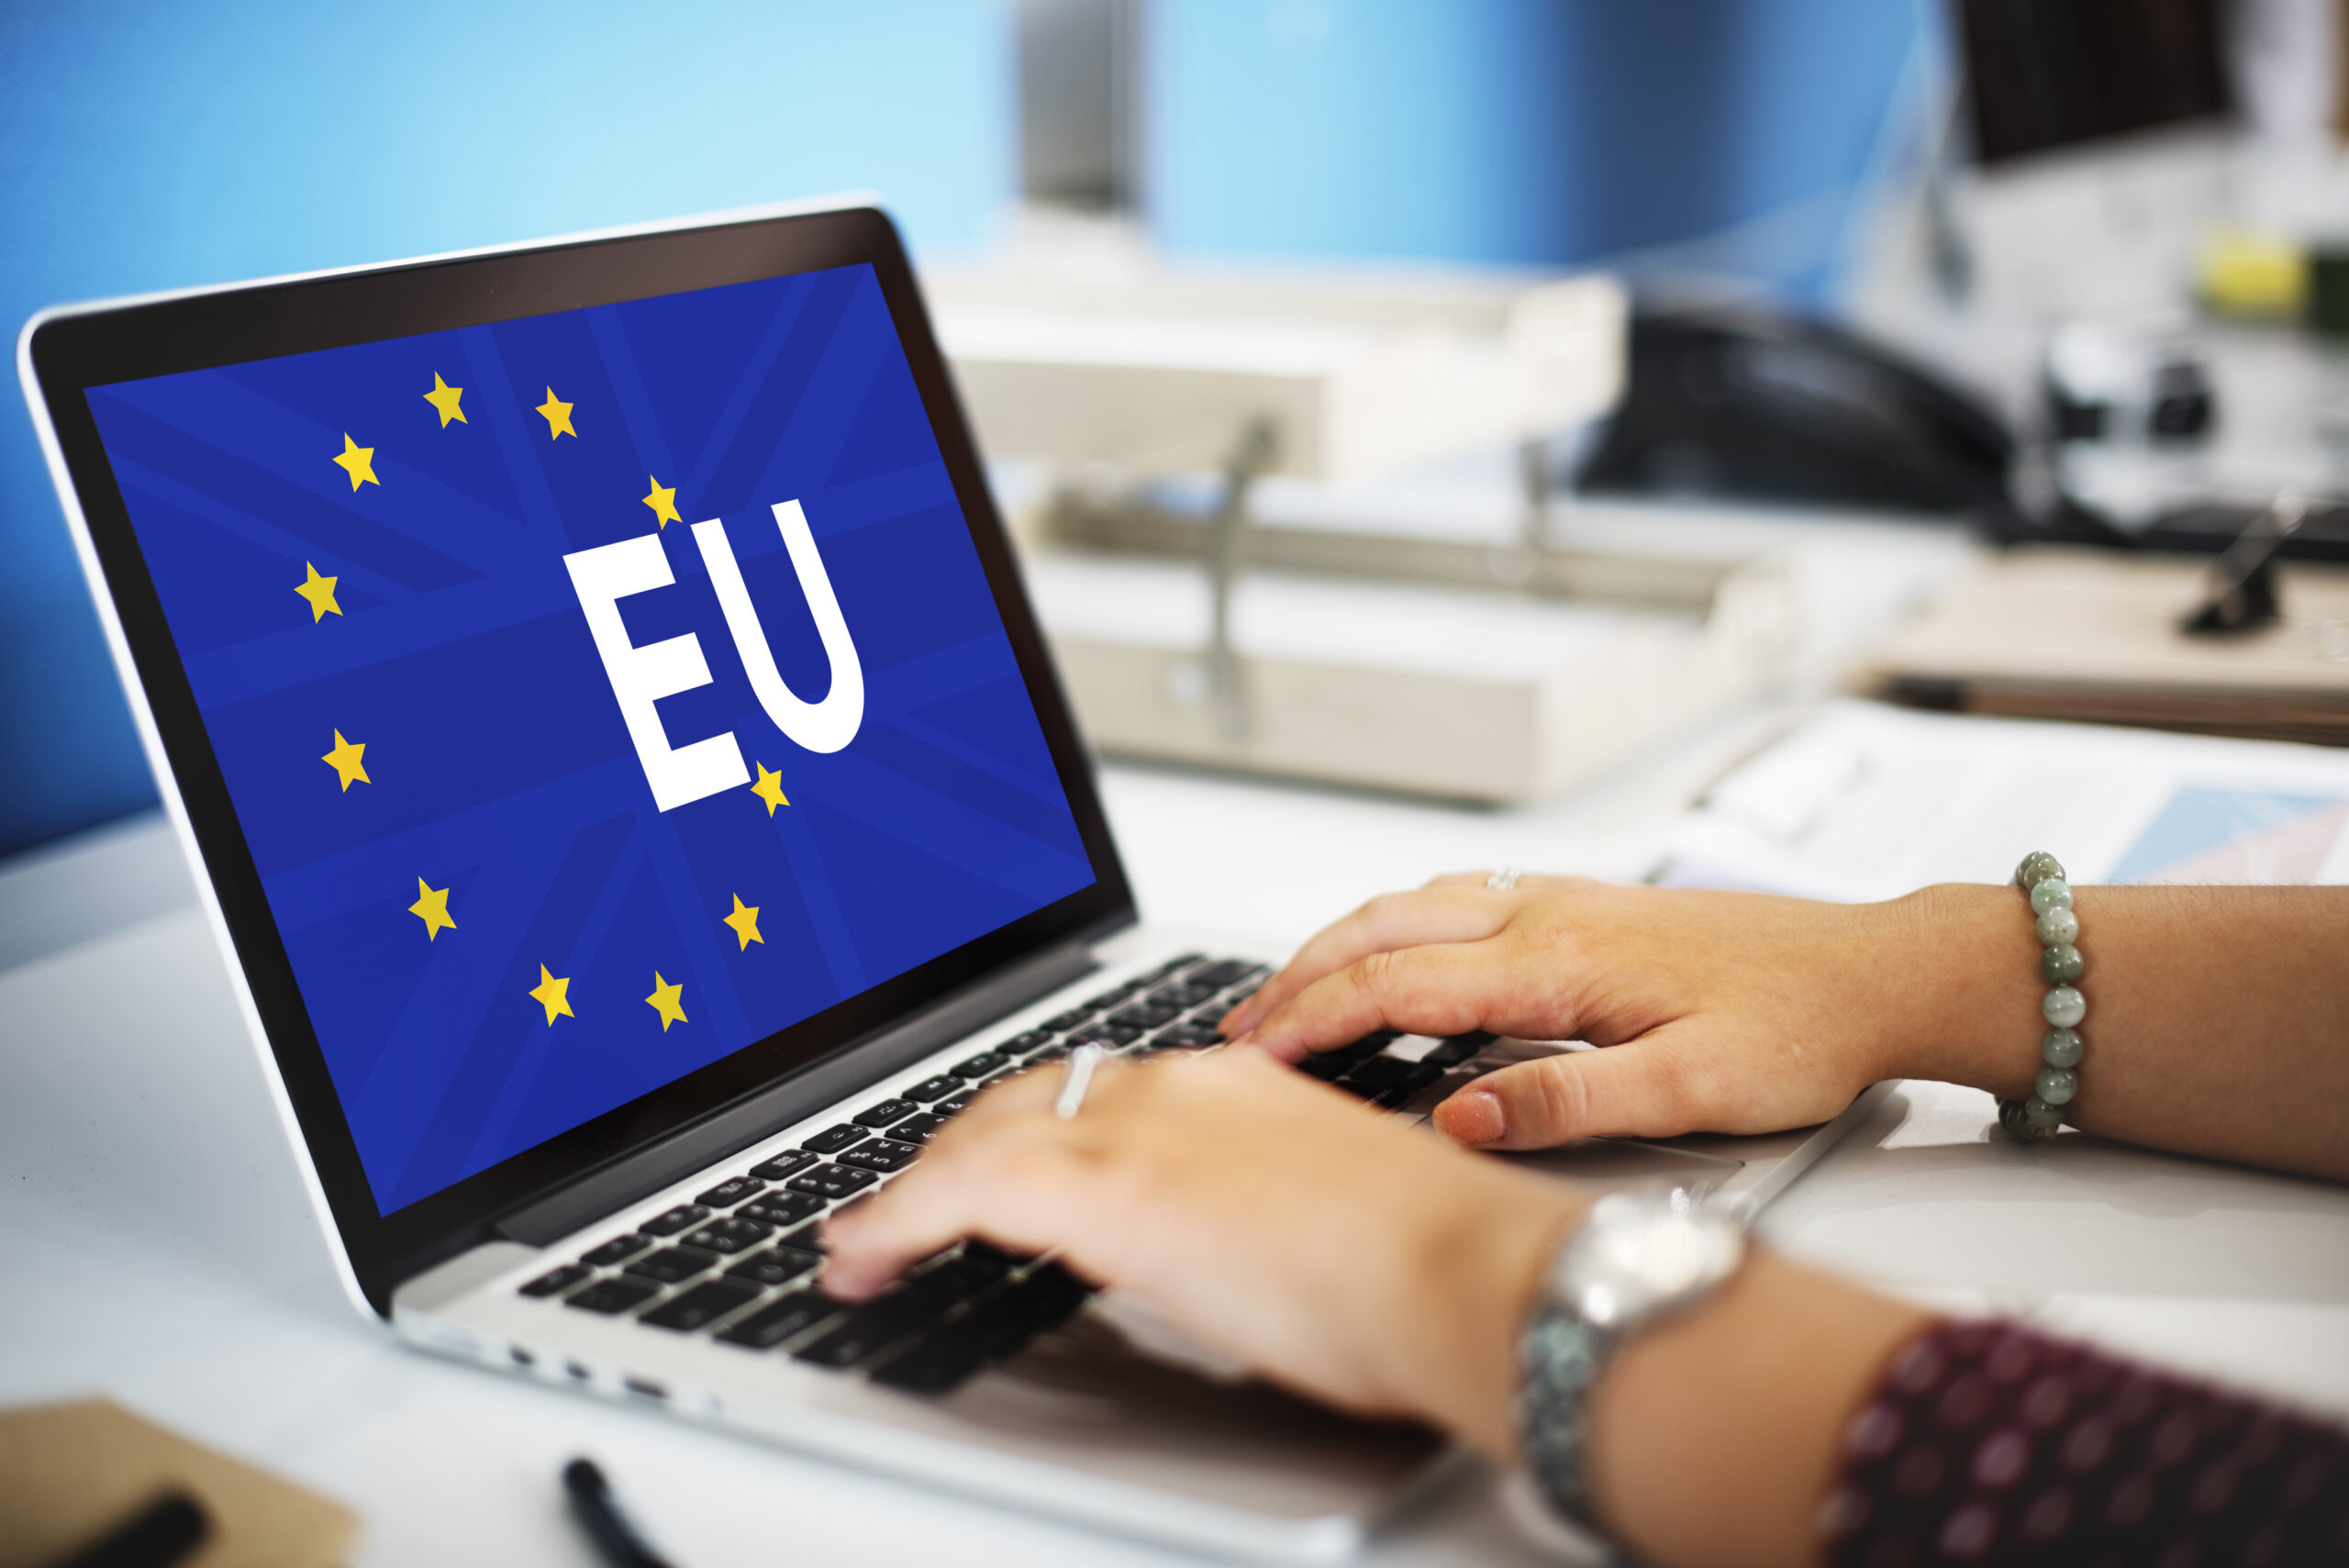 An image of a laptop with the EU symbol as it's screensaver